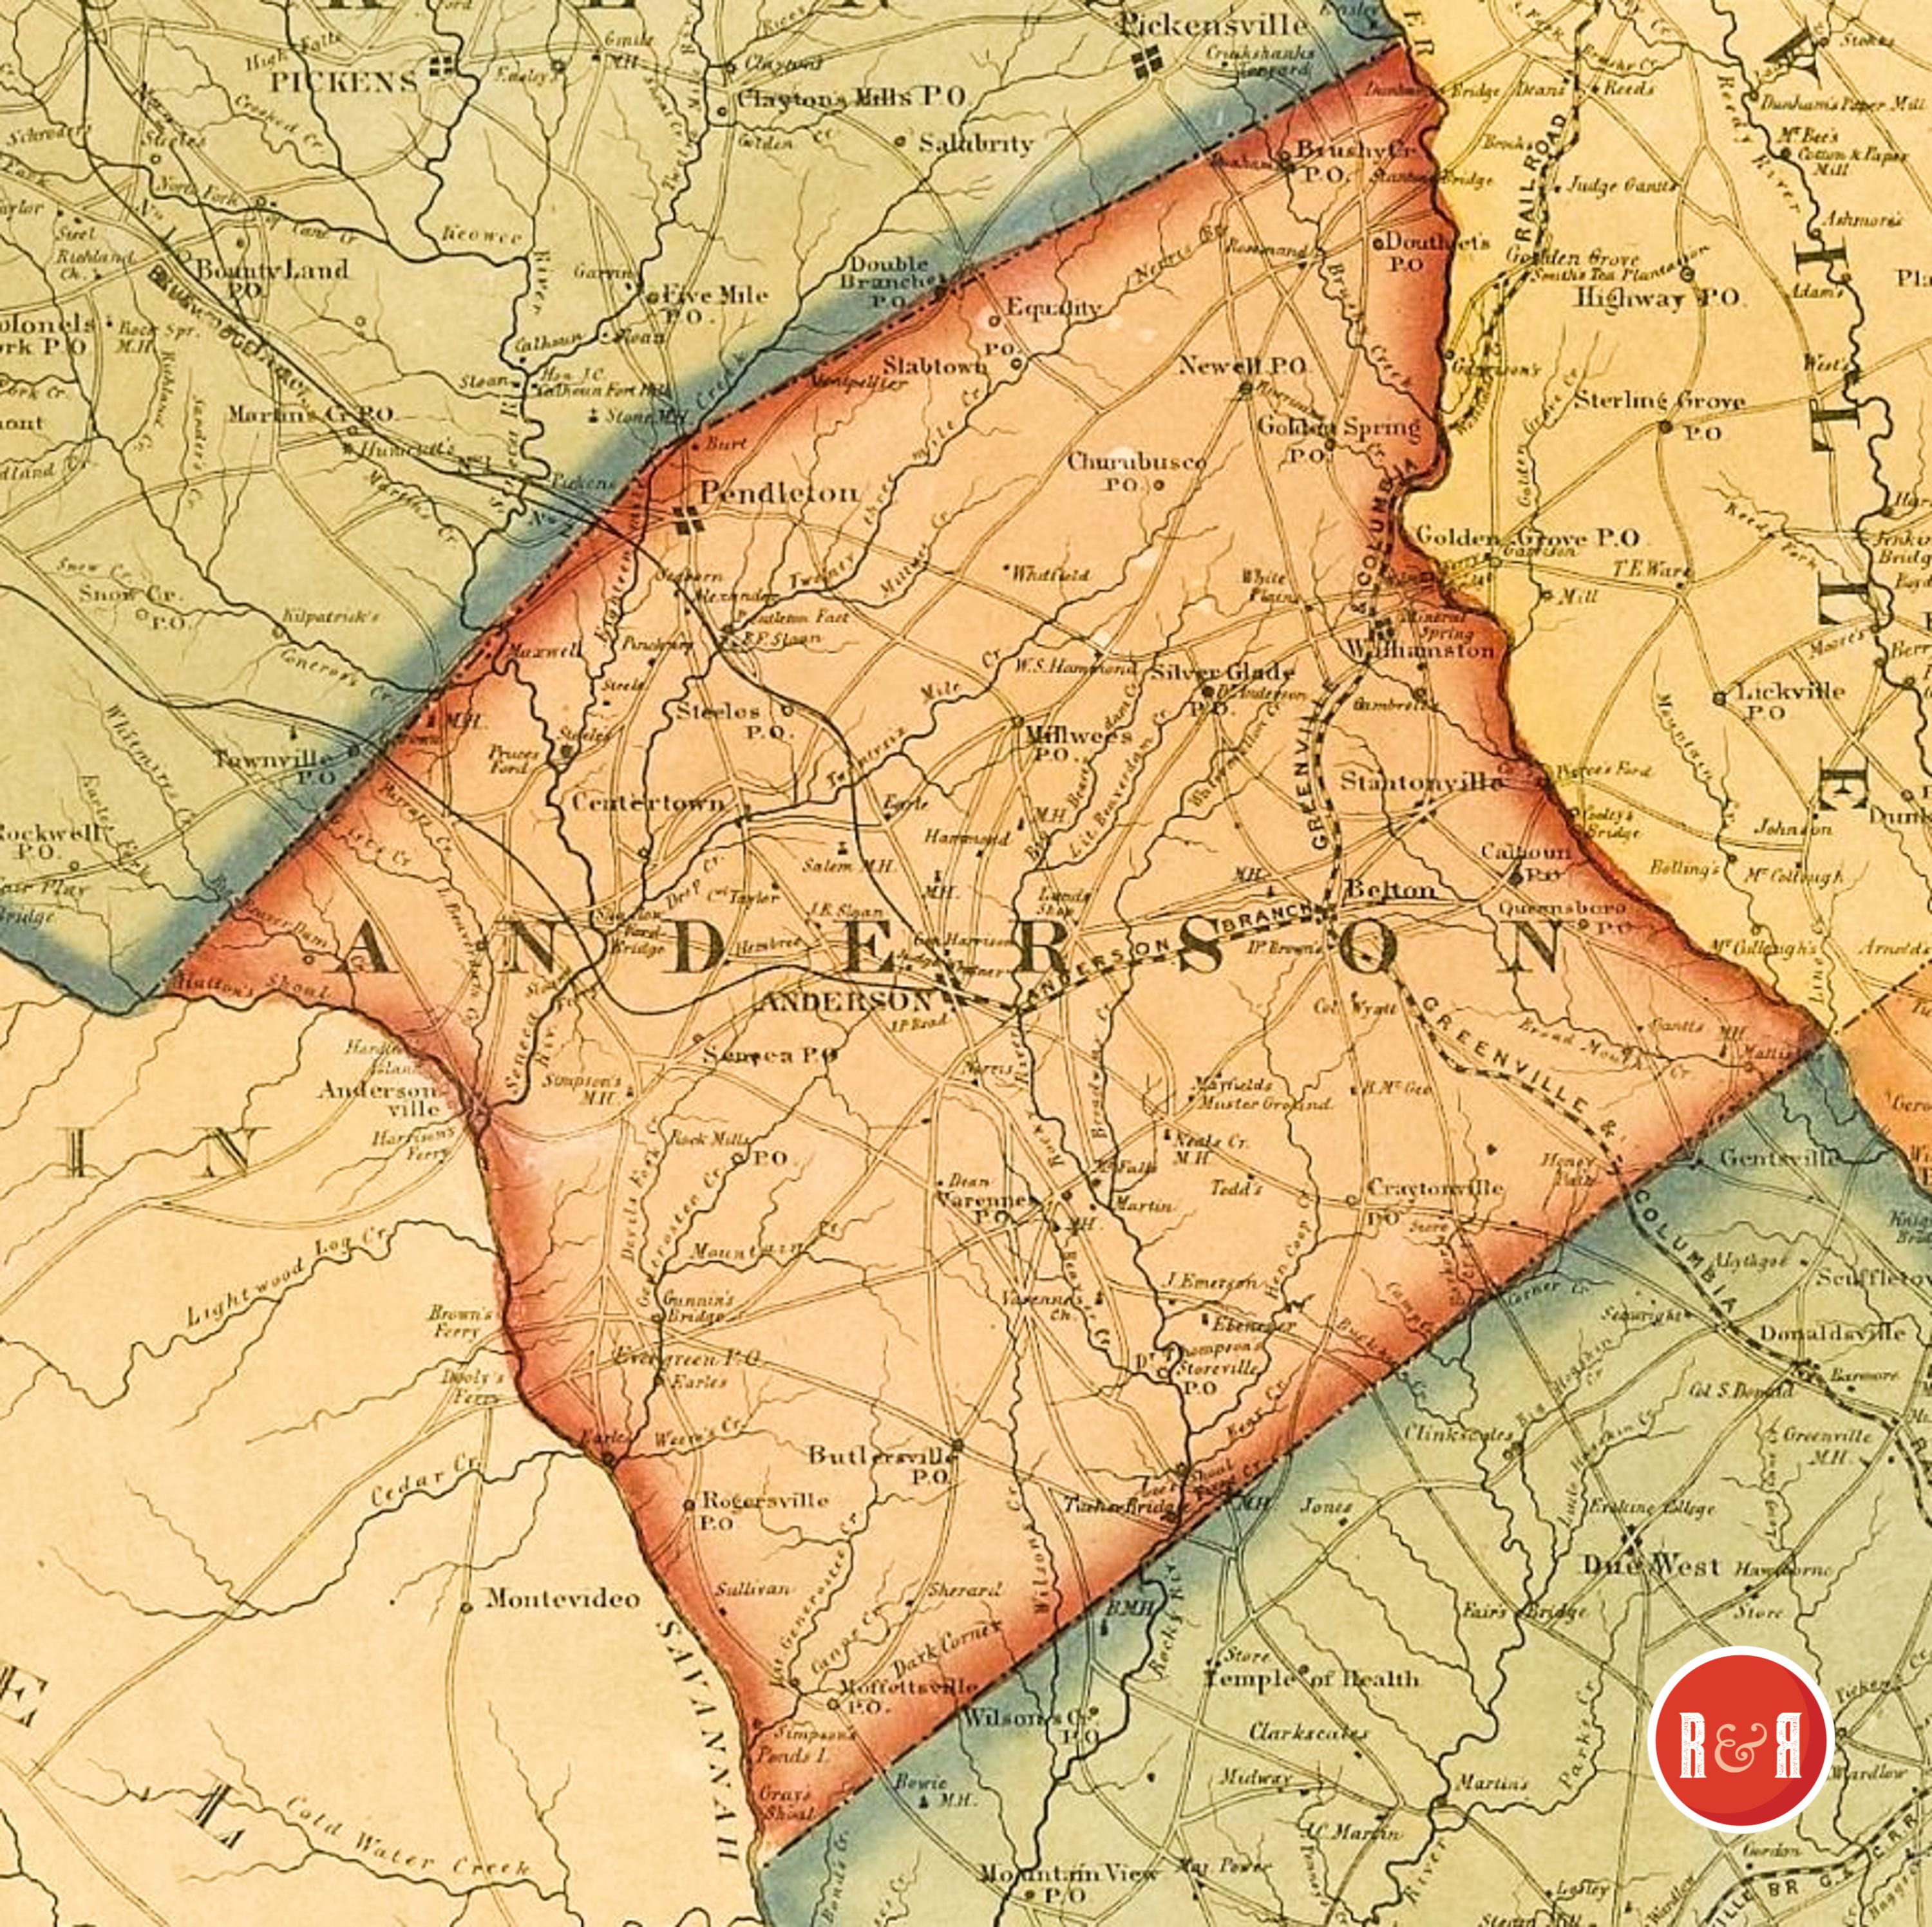 Colton's 1854 Map of Anderson County - Enlarged